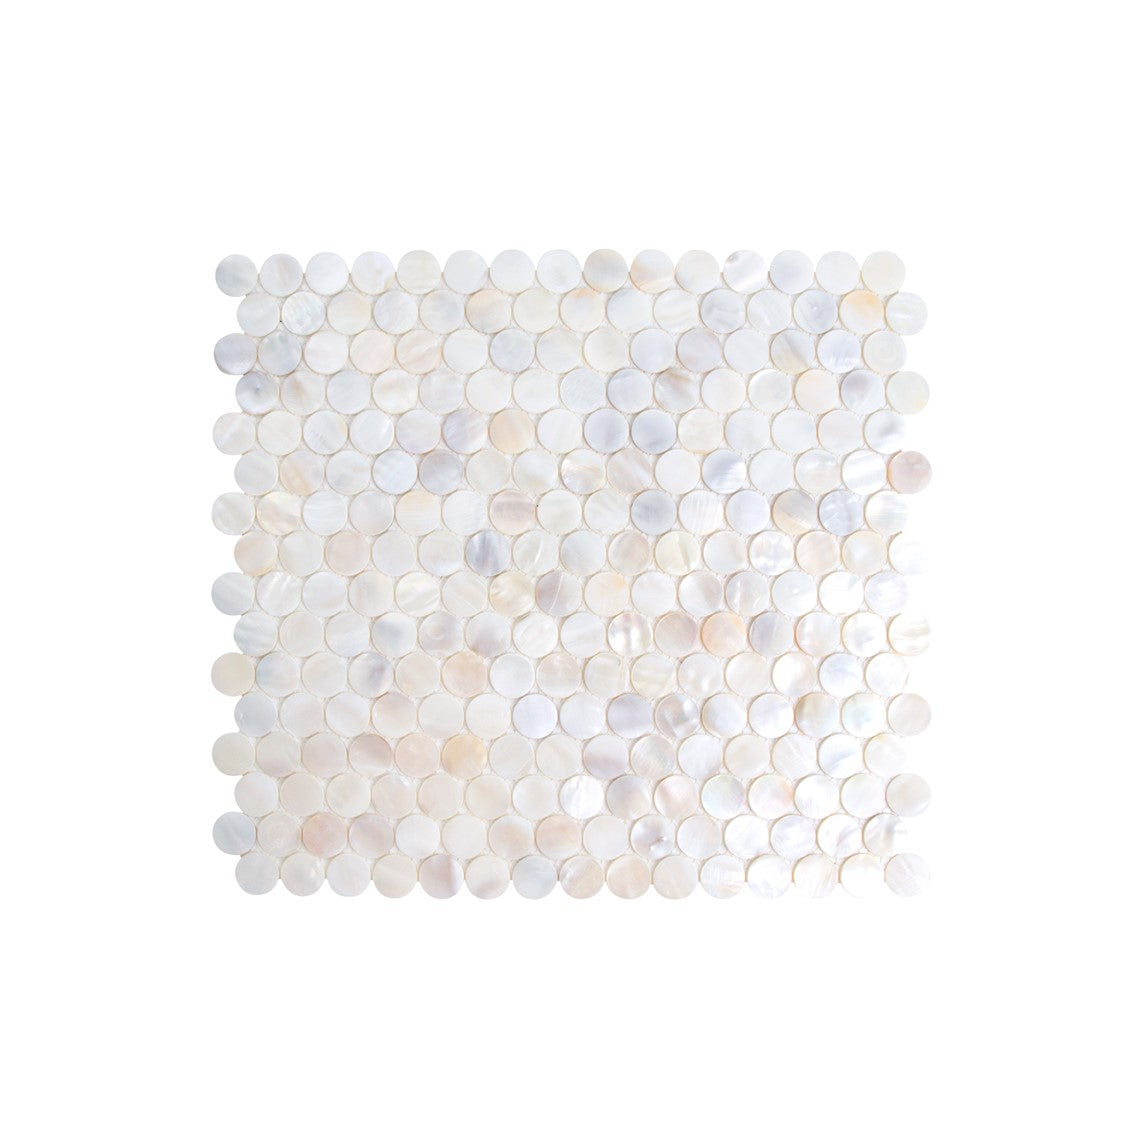 0.8" x 0.8" Mother of Pearl Seashell Penny Round Mosaic Sheet - 10.78 Square Feet Per Carton - Arctic Breeze